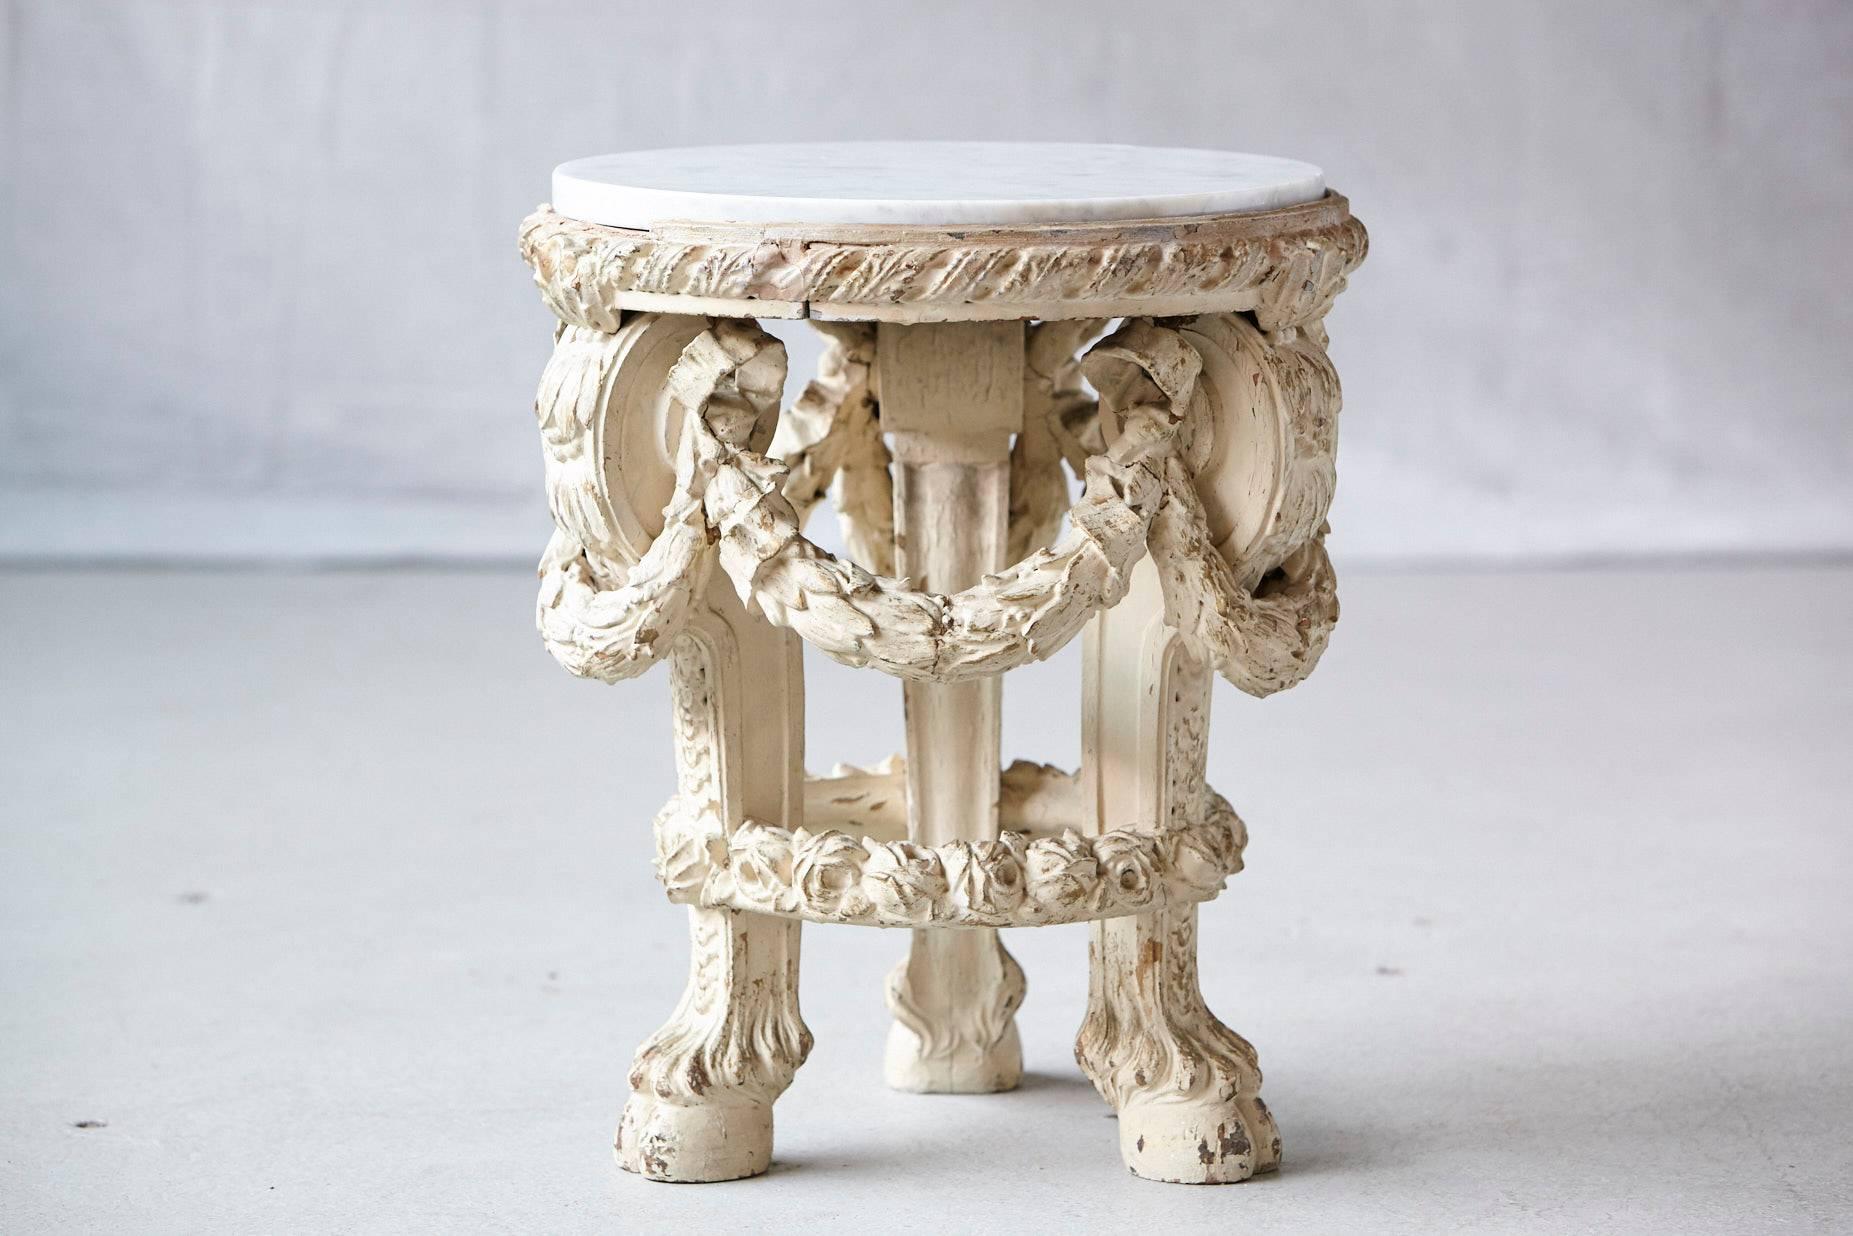 Beautiful Victorian carved side table with with rich ornamental details, paint finish and marble top.
Some restoration to the table and marble, part of the tables rim is missing, please refer to detailed photos.
A very charming table with a great